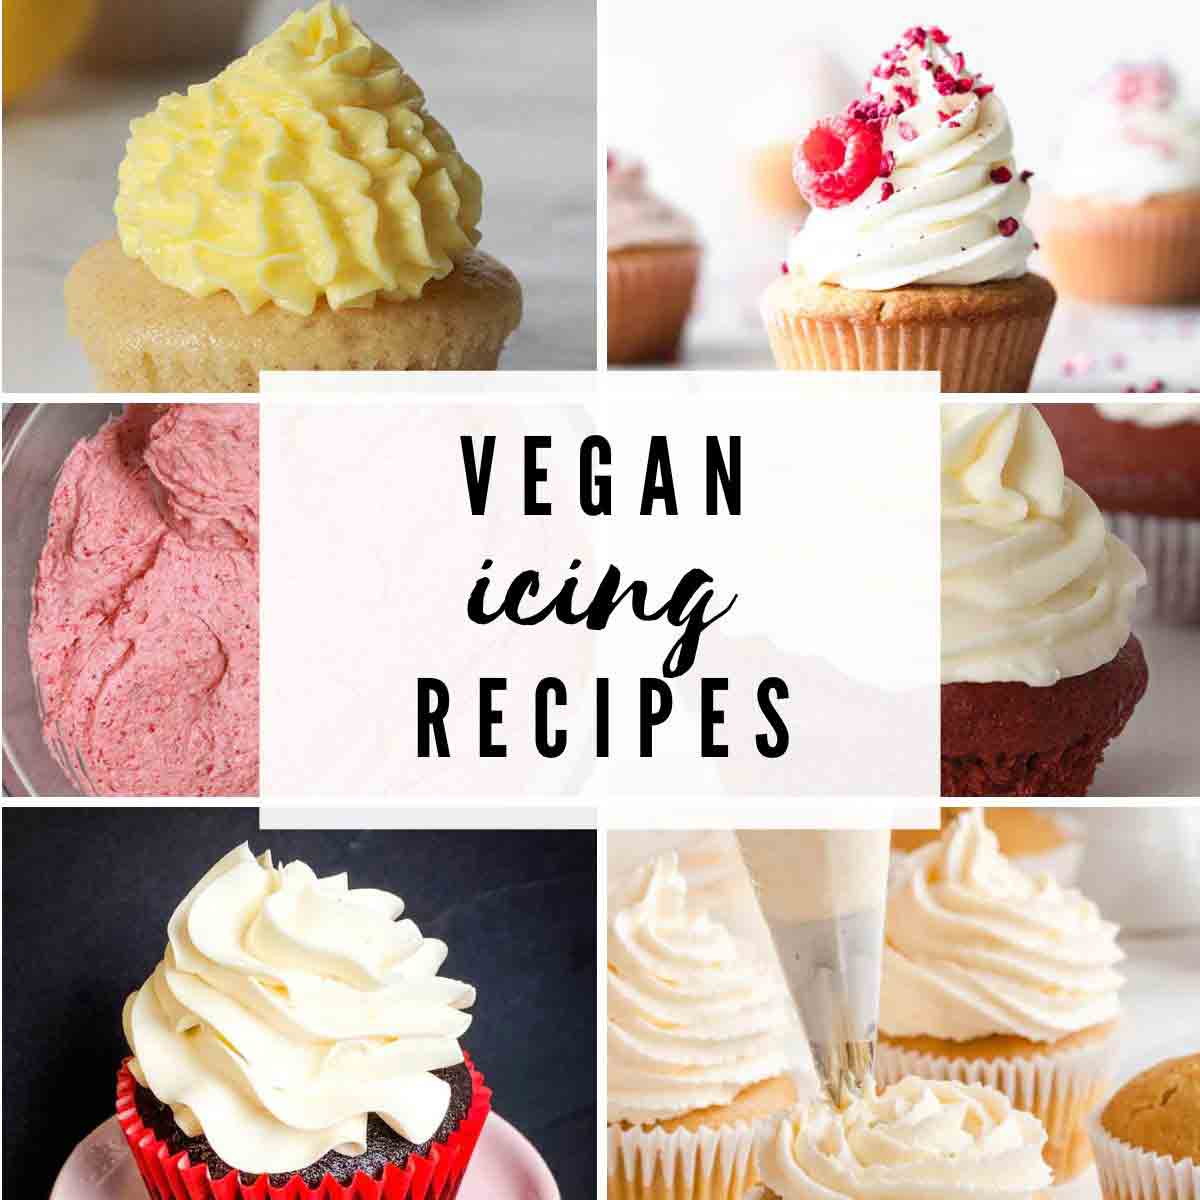 Icing Images With Text Overlay That Reads 'vegan Icing Recipes'